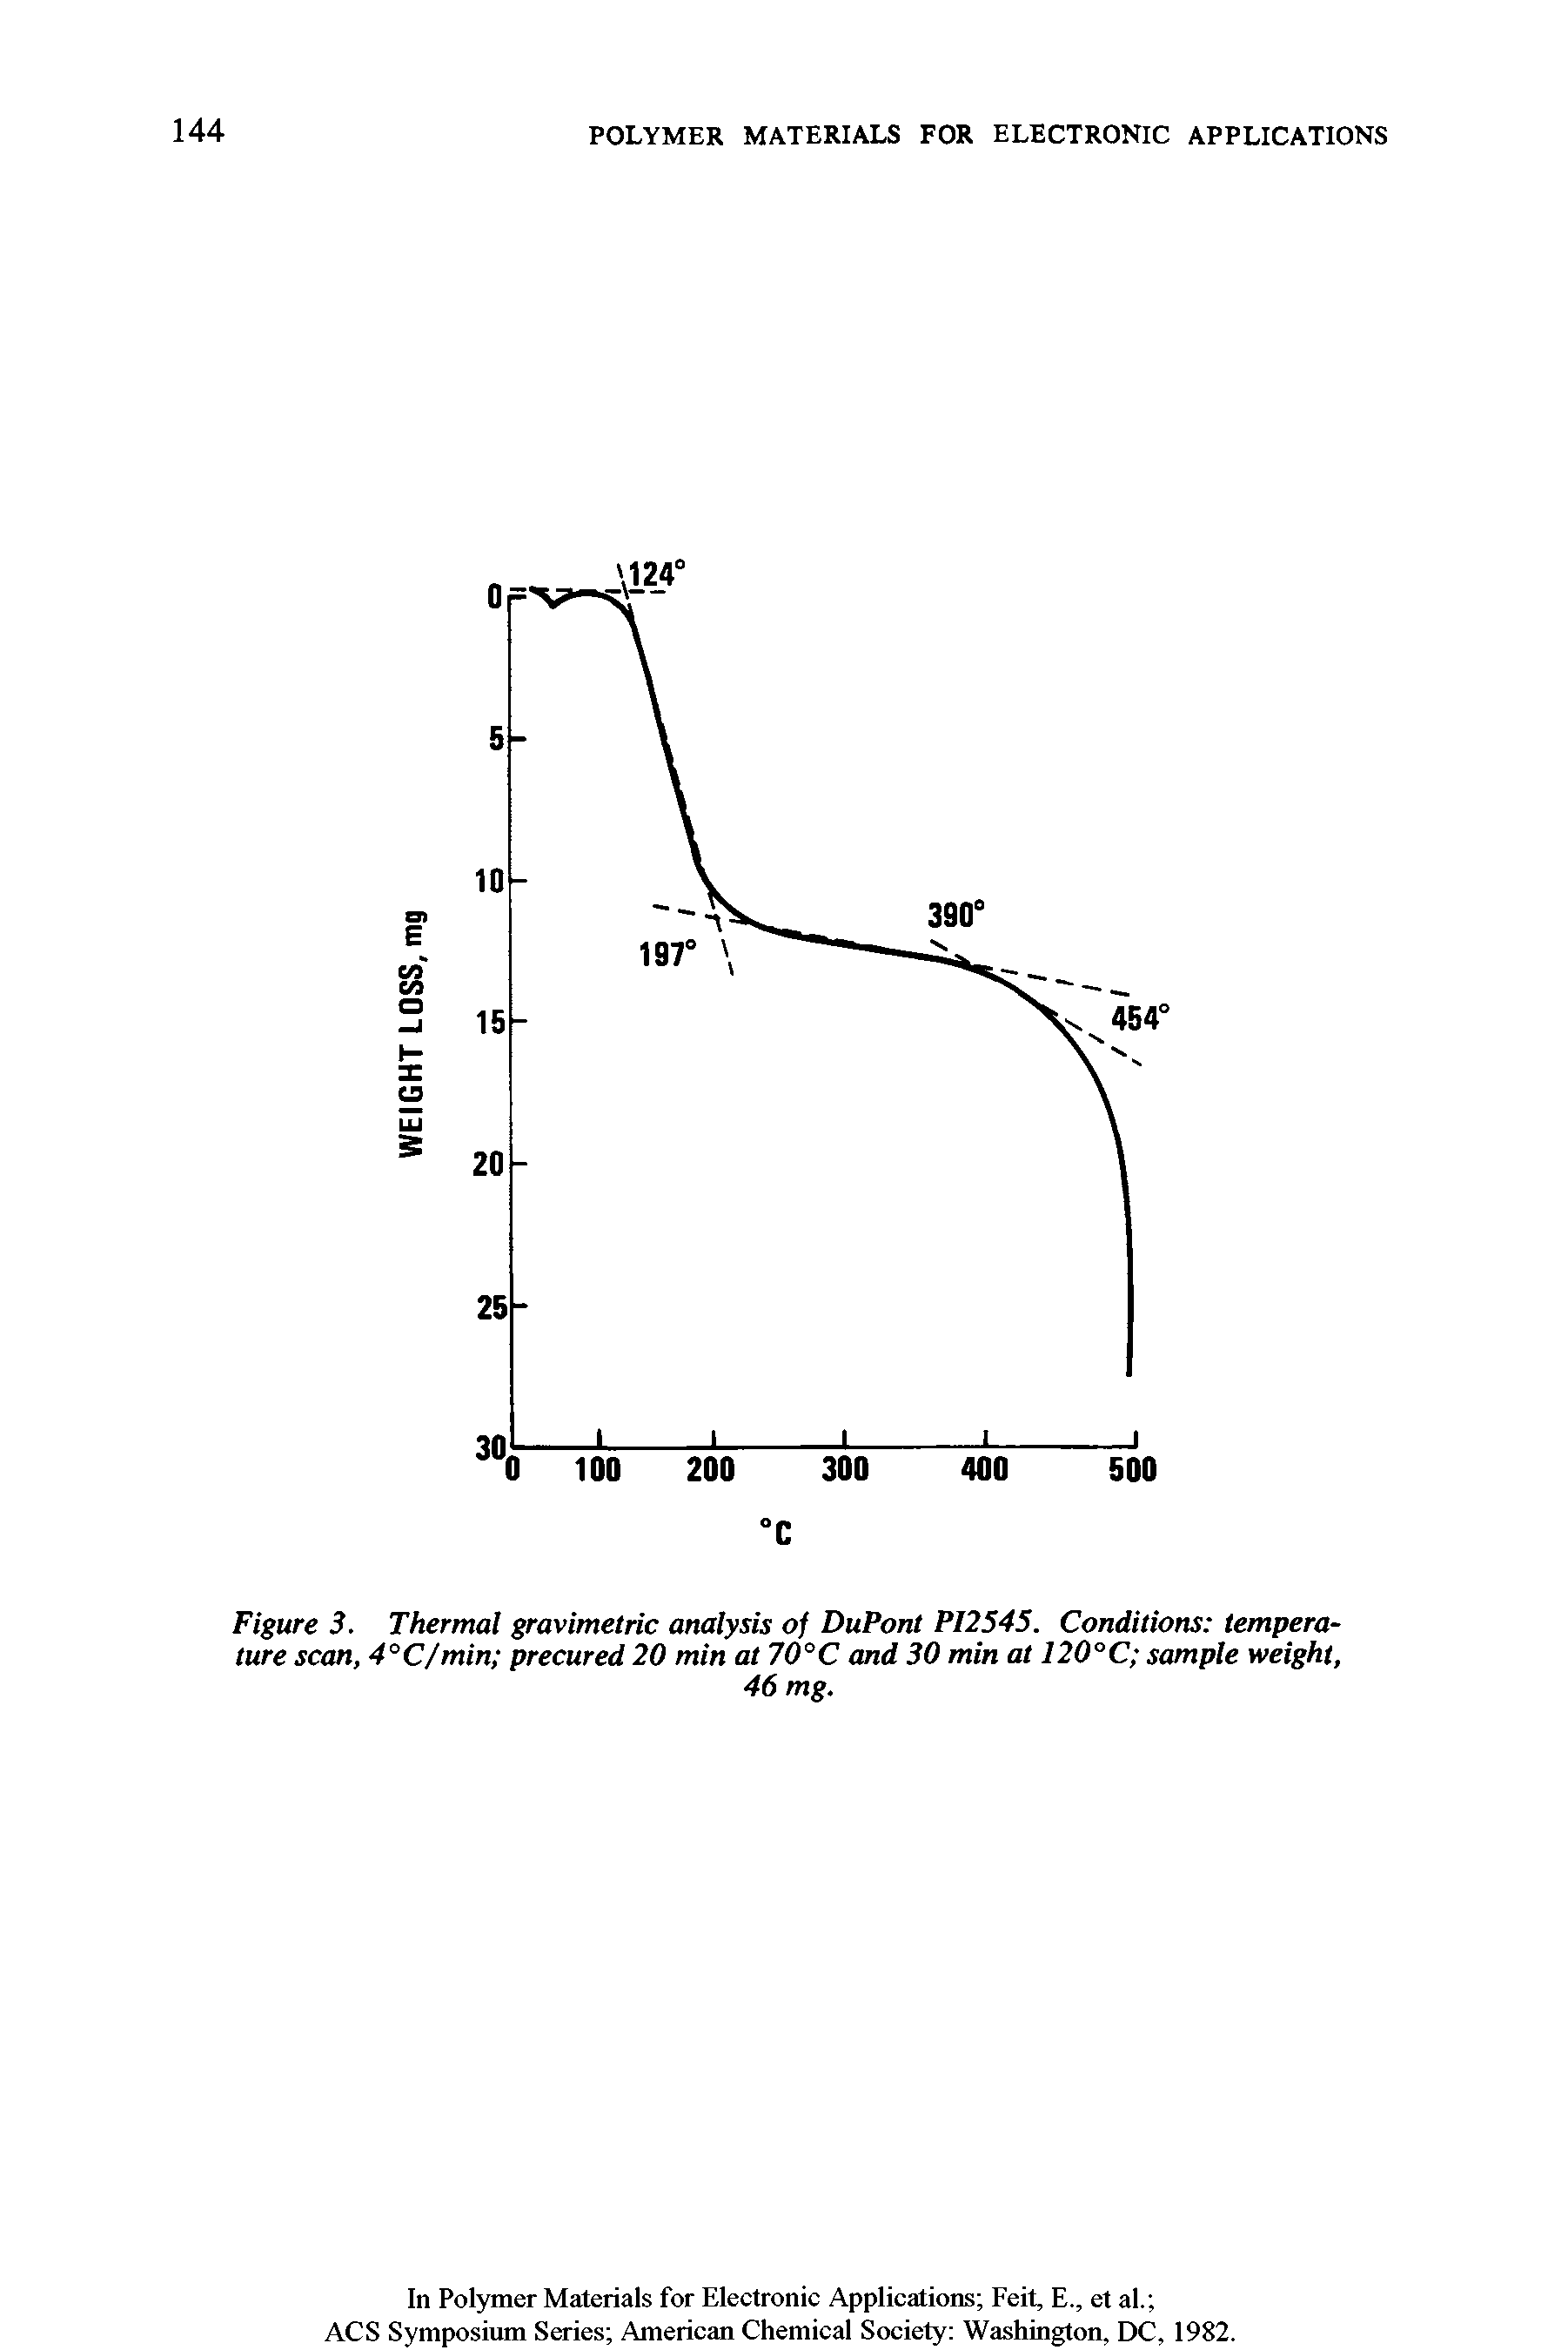 Figure 3. Thermal gravimetric analysis of DuPont PI2545. Conditions temperature scan, 4°C/min precured 20 min at 70°C and 30 min at 120°C sample weight,...